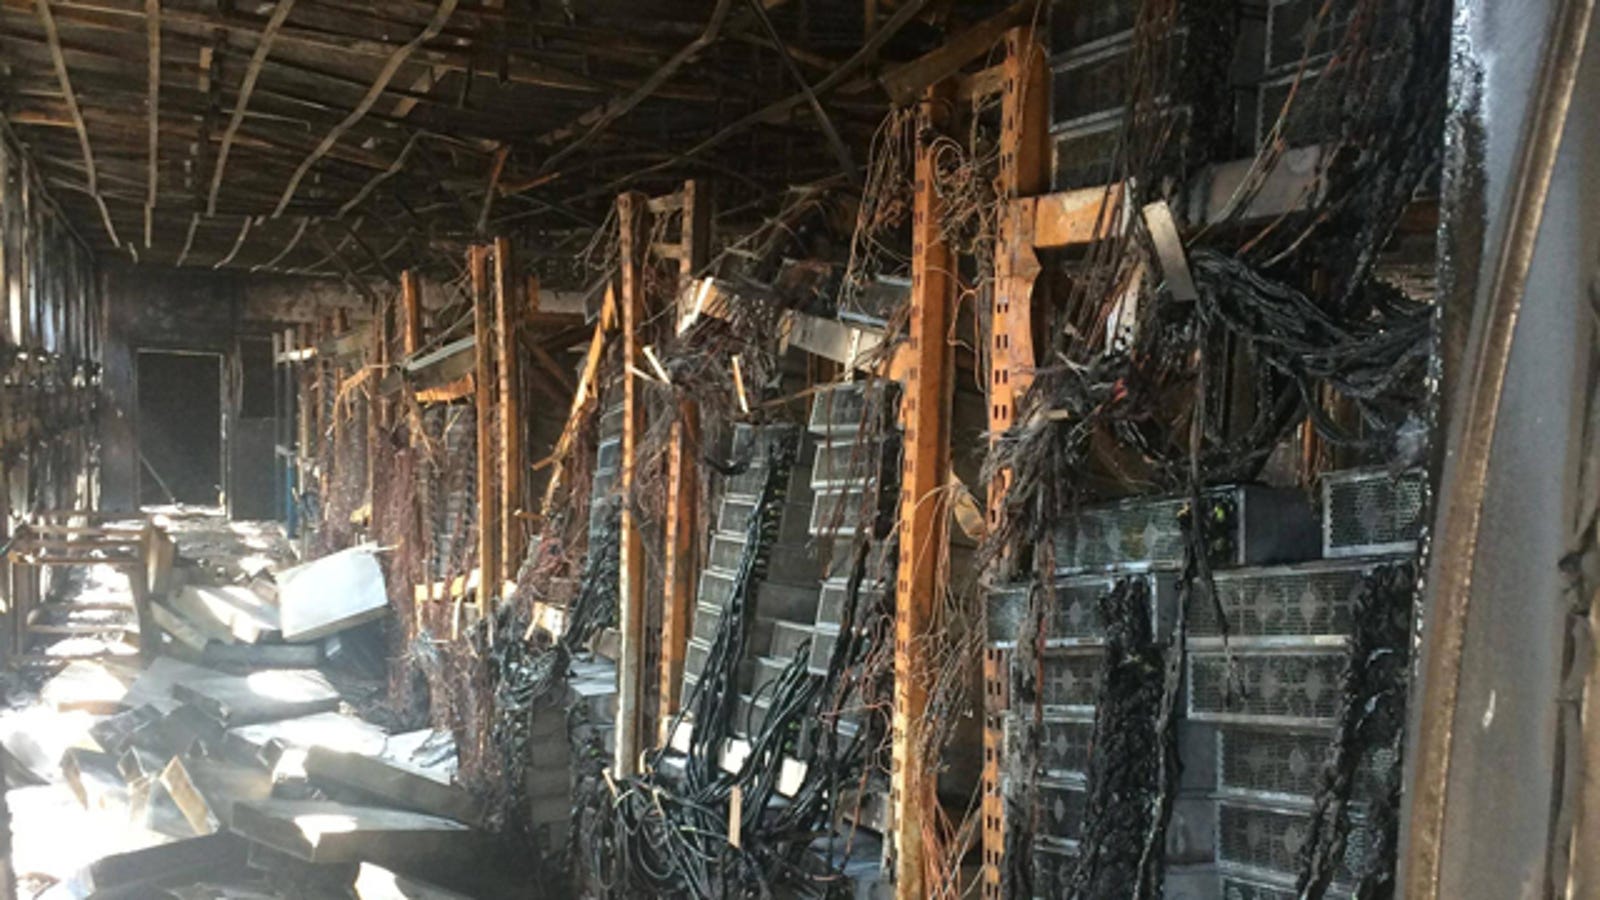 A Fire Took Out A Huge Bitcoin Mining Operation - 